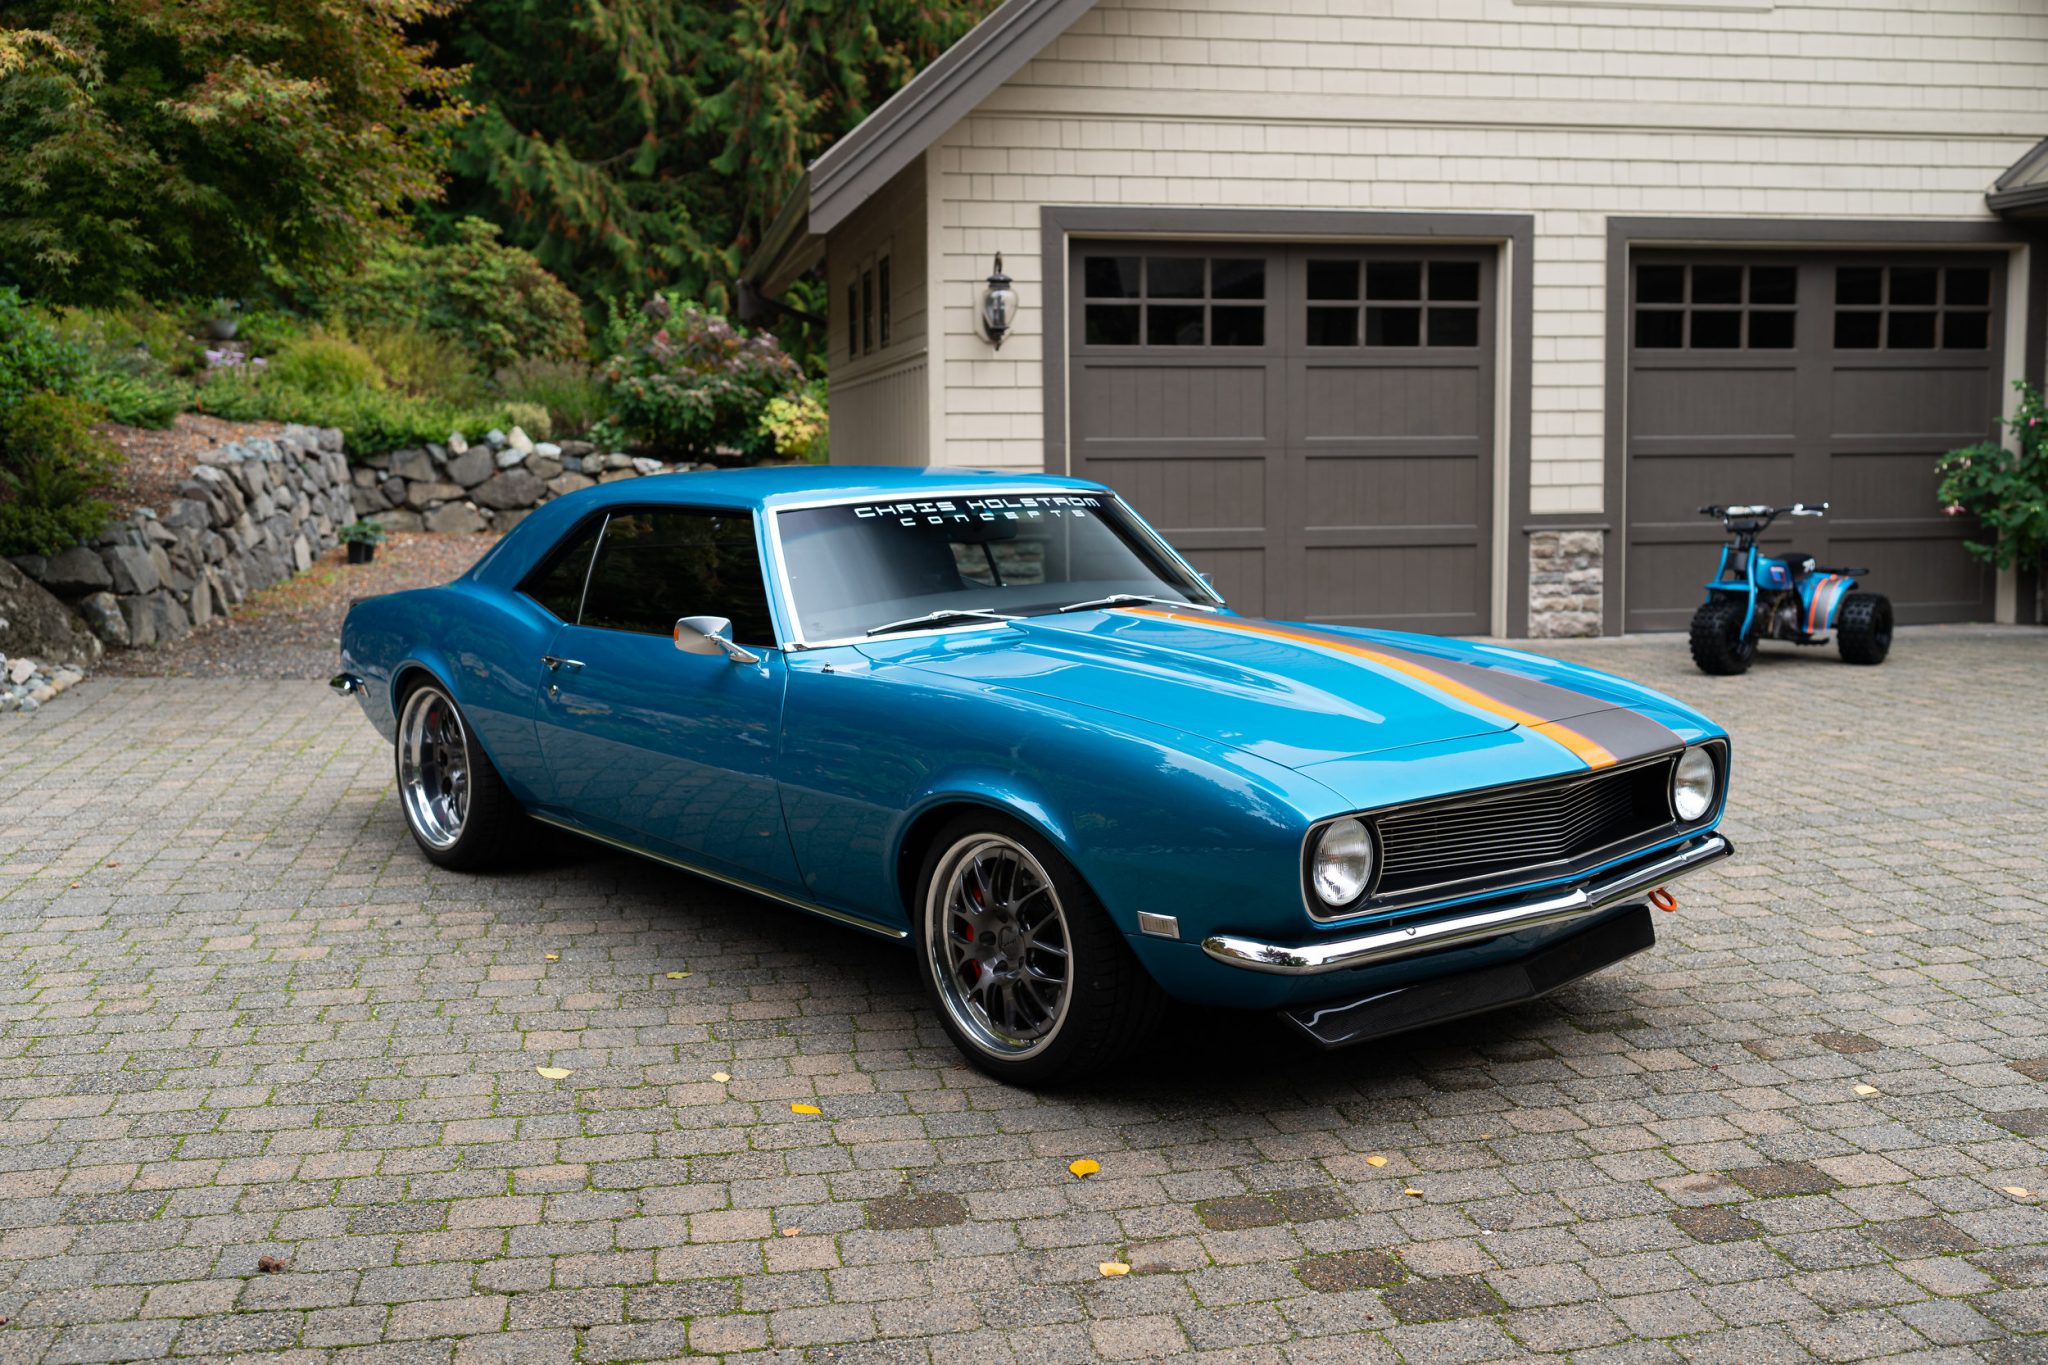 This Modified Award-Winning 1968 Camaro Goes as a Bundle With a